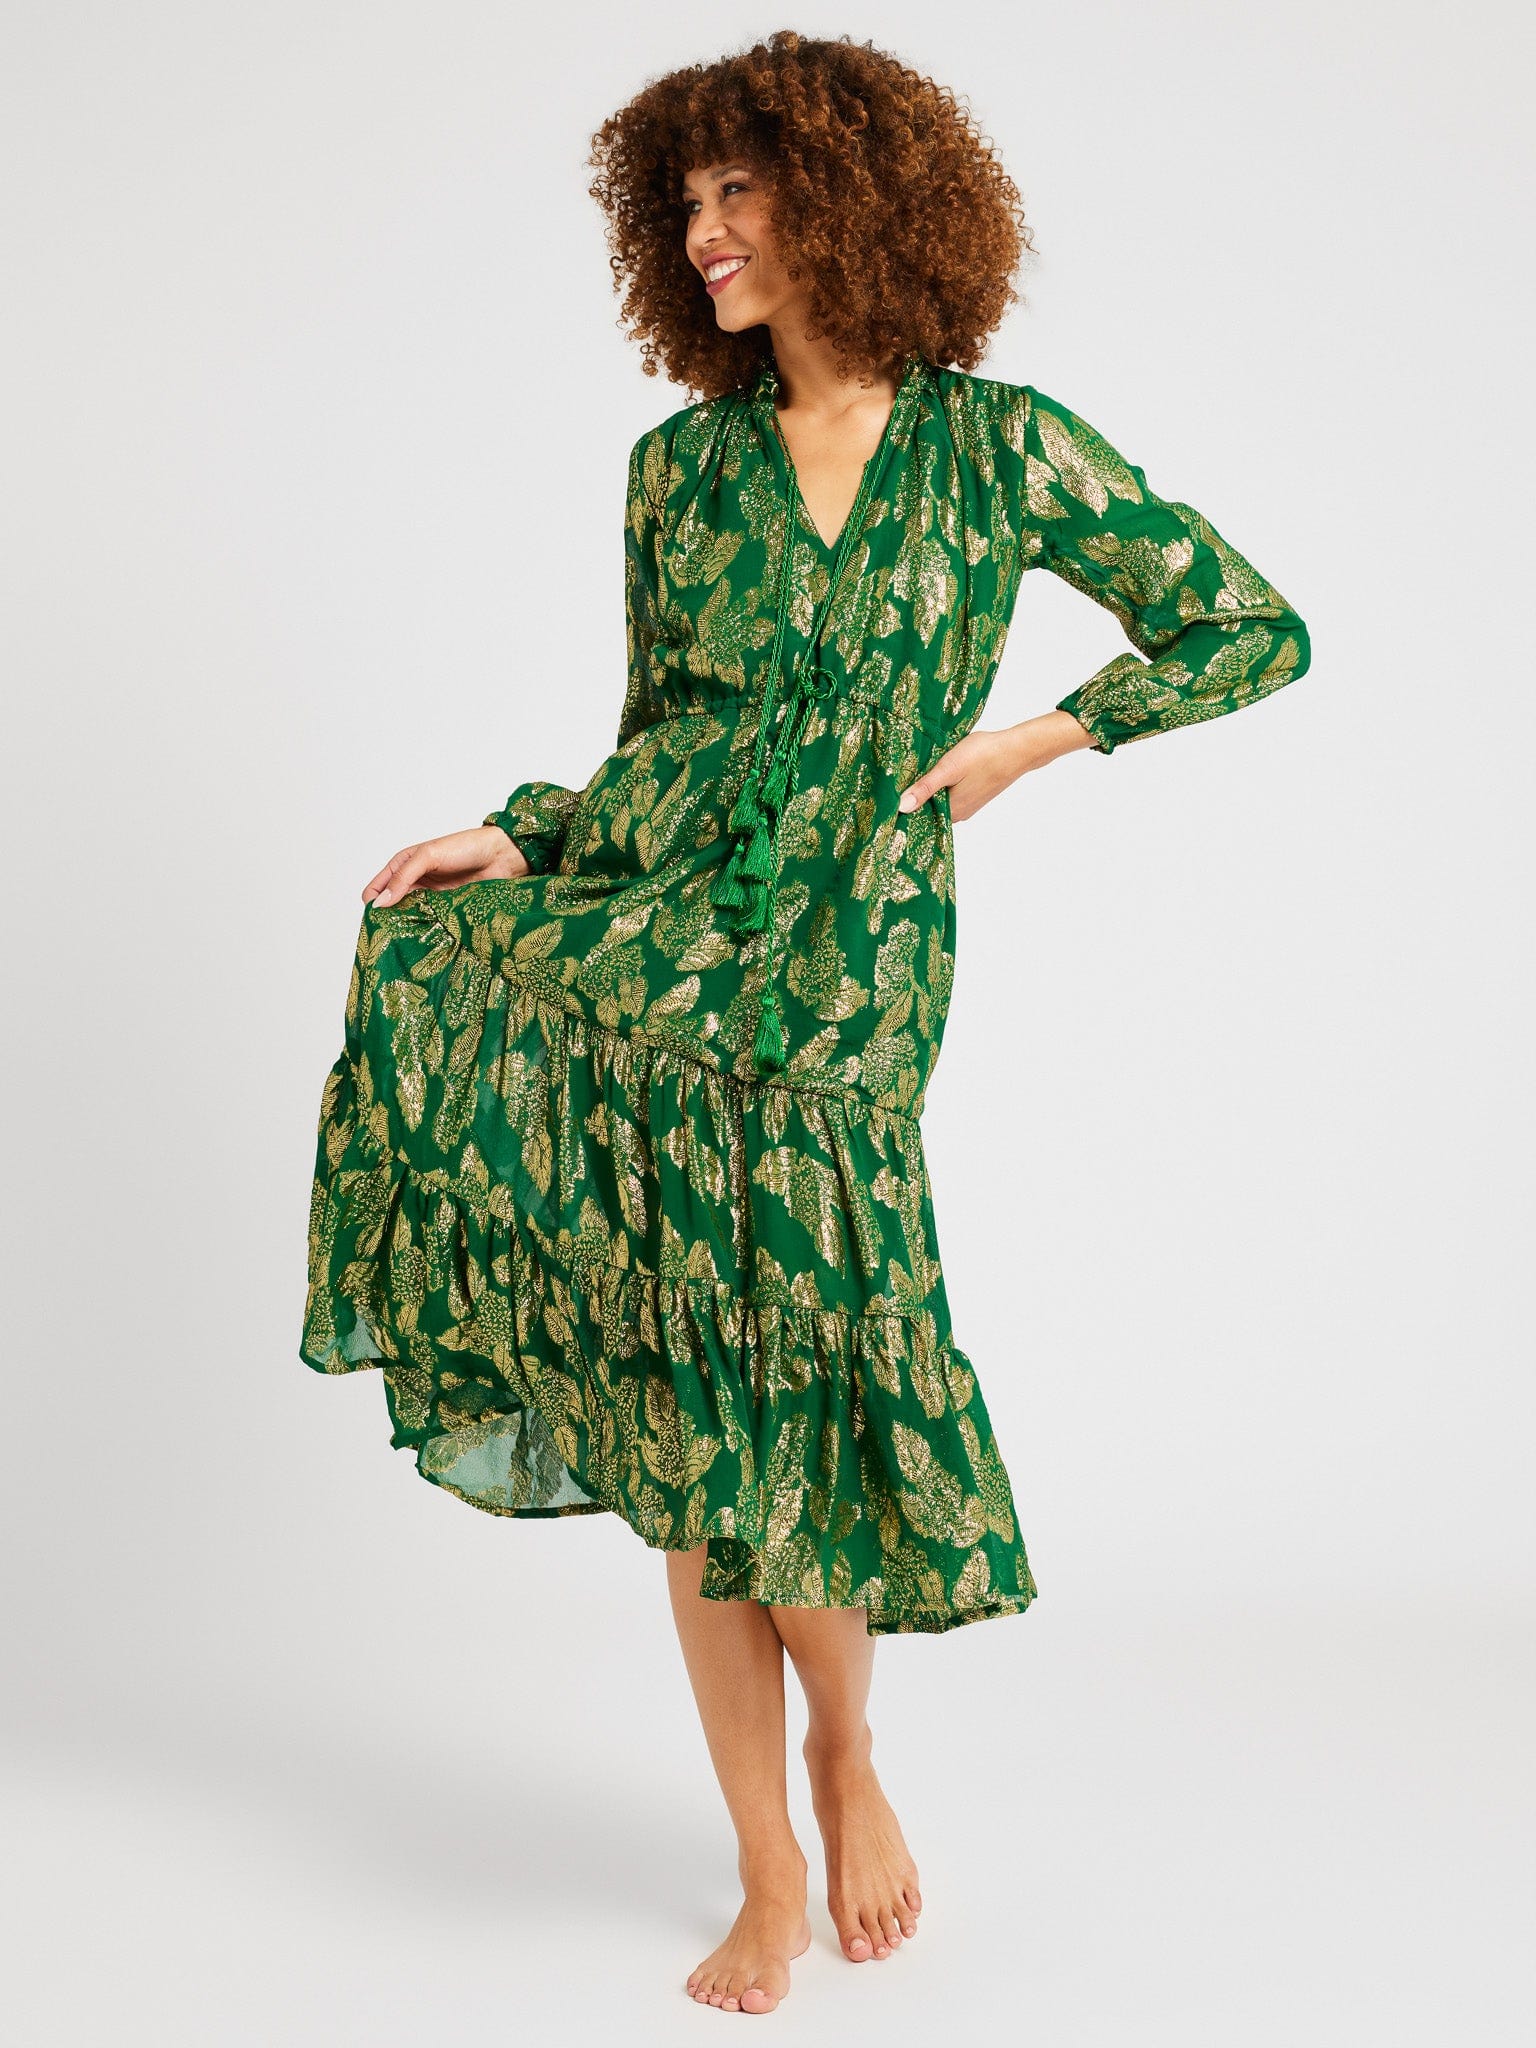 MILLE Clothing Astrid Dress in Malachite Shimmer